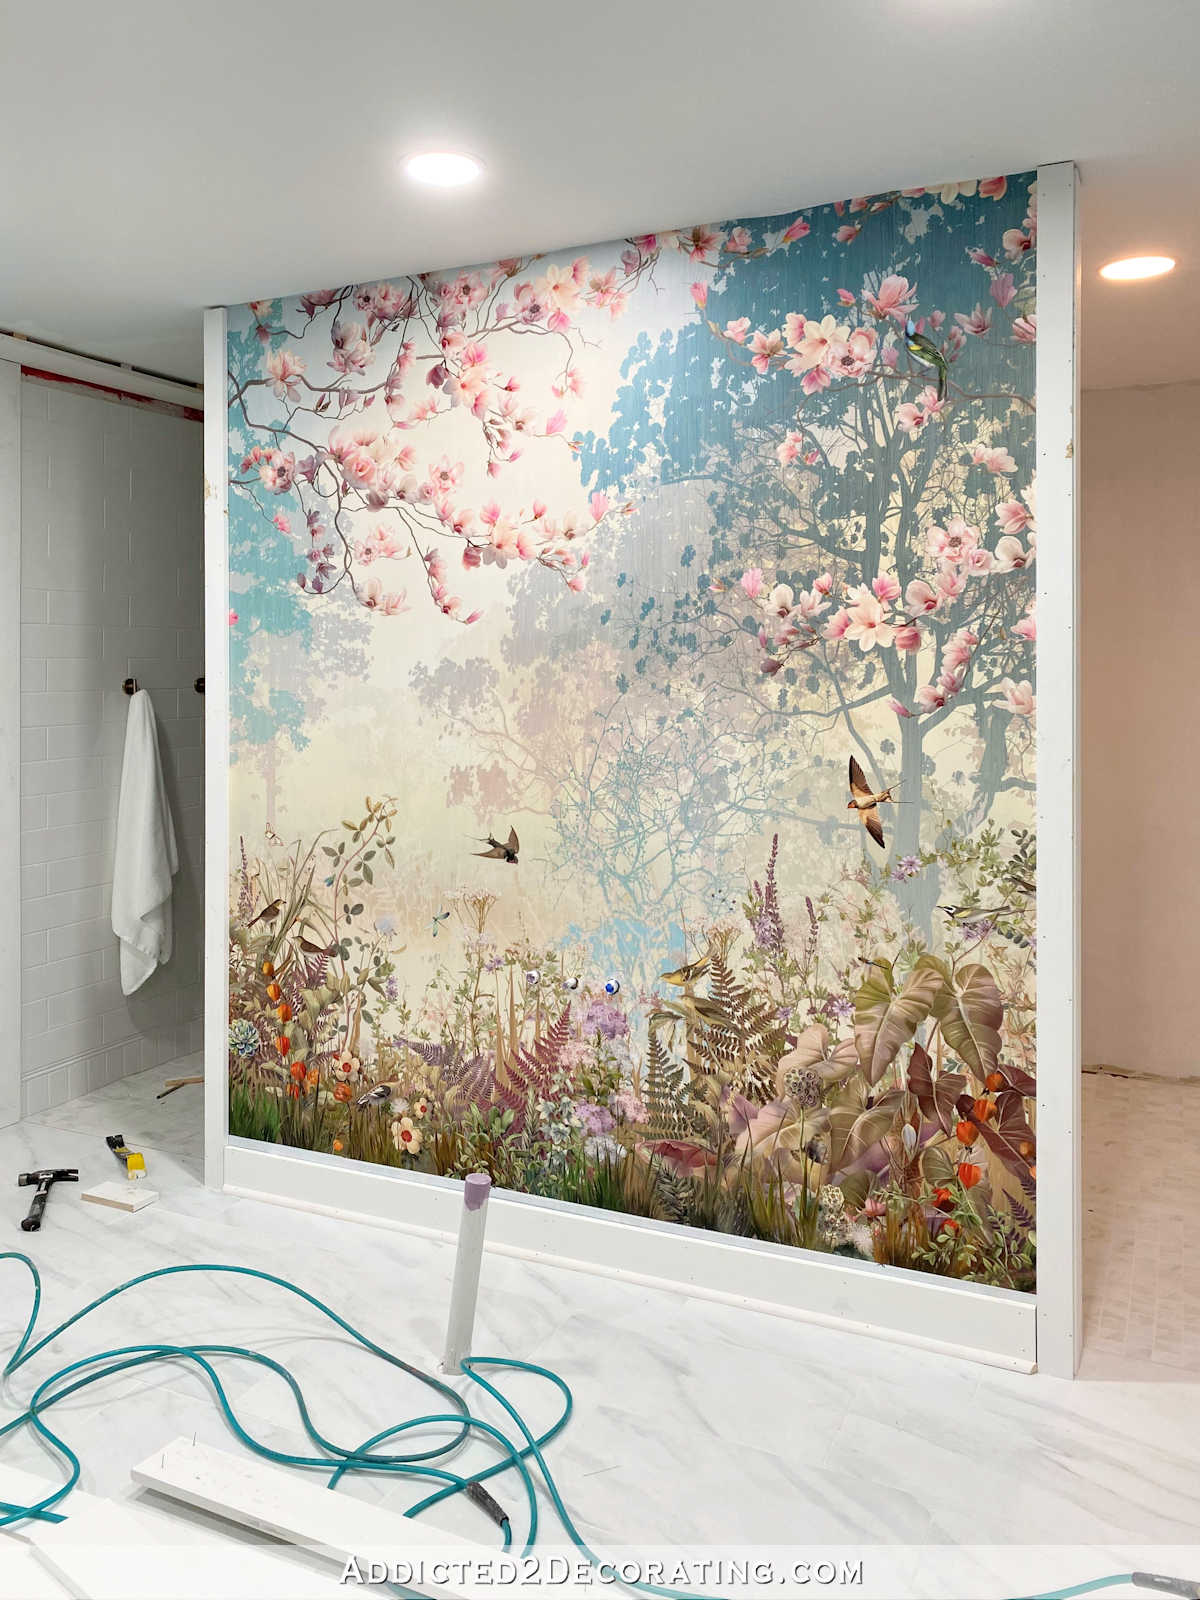 colorful wallpaper mural of forest scene in teals, pinks and greens in master bathroom